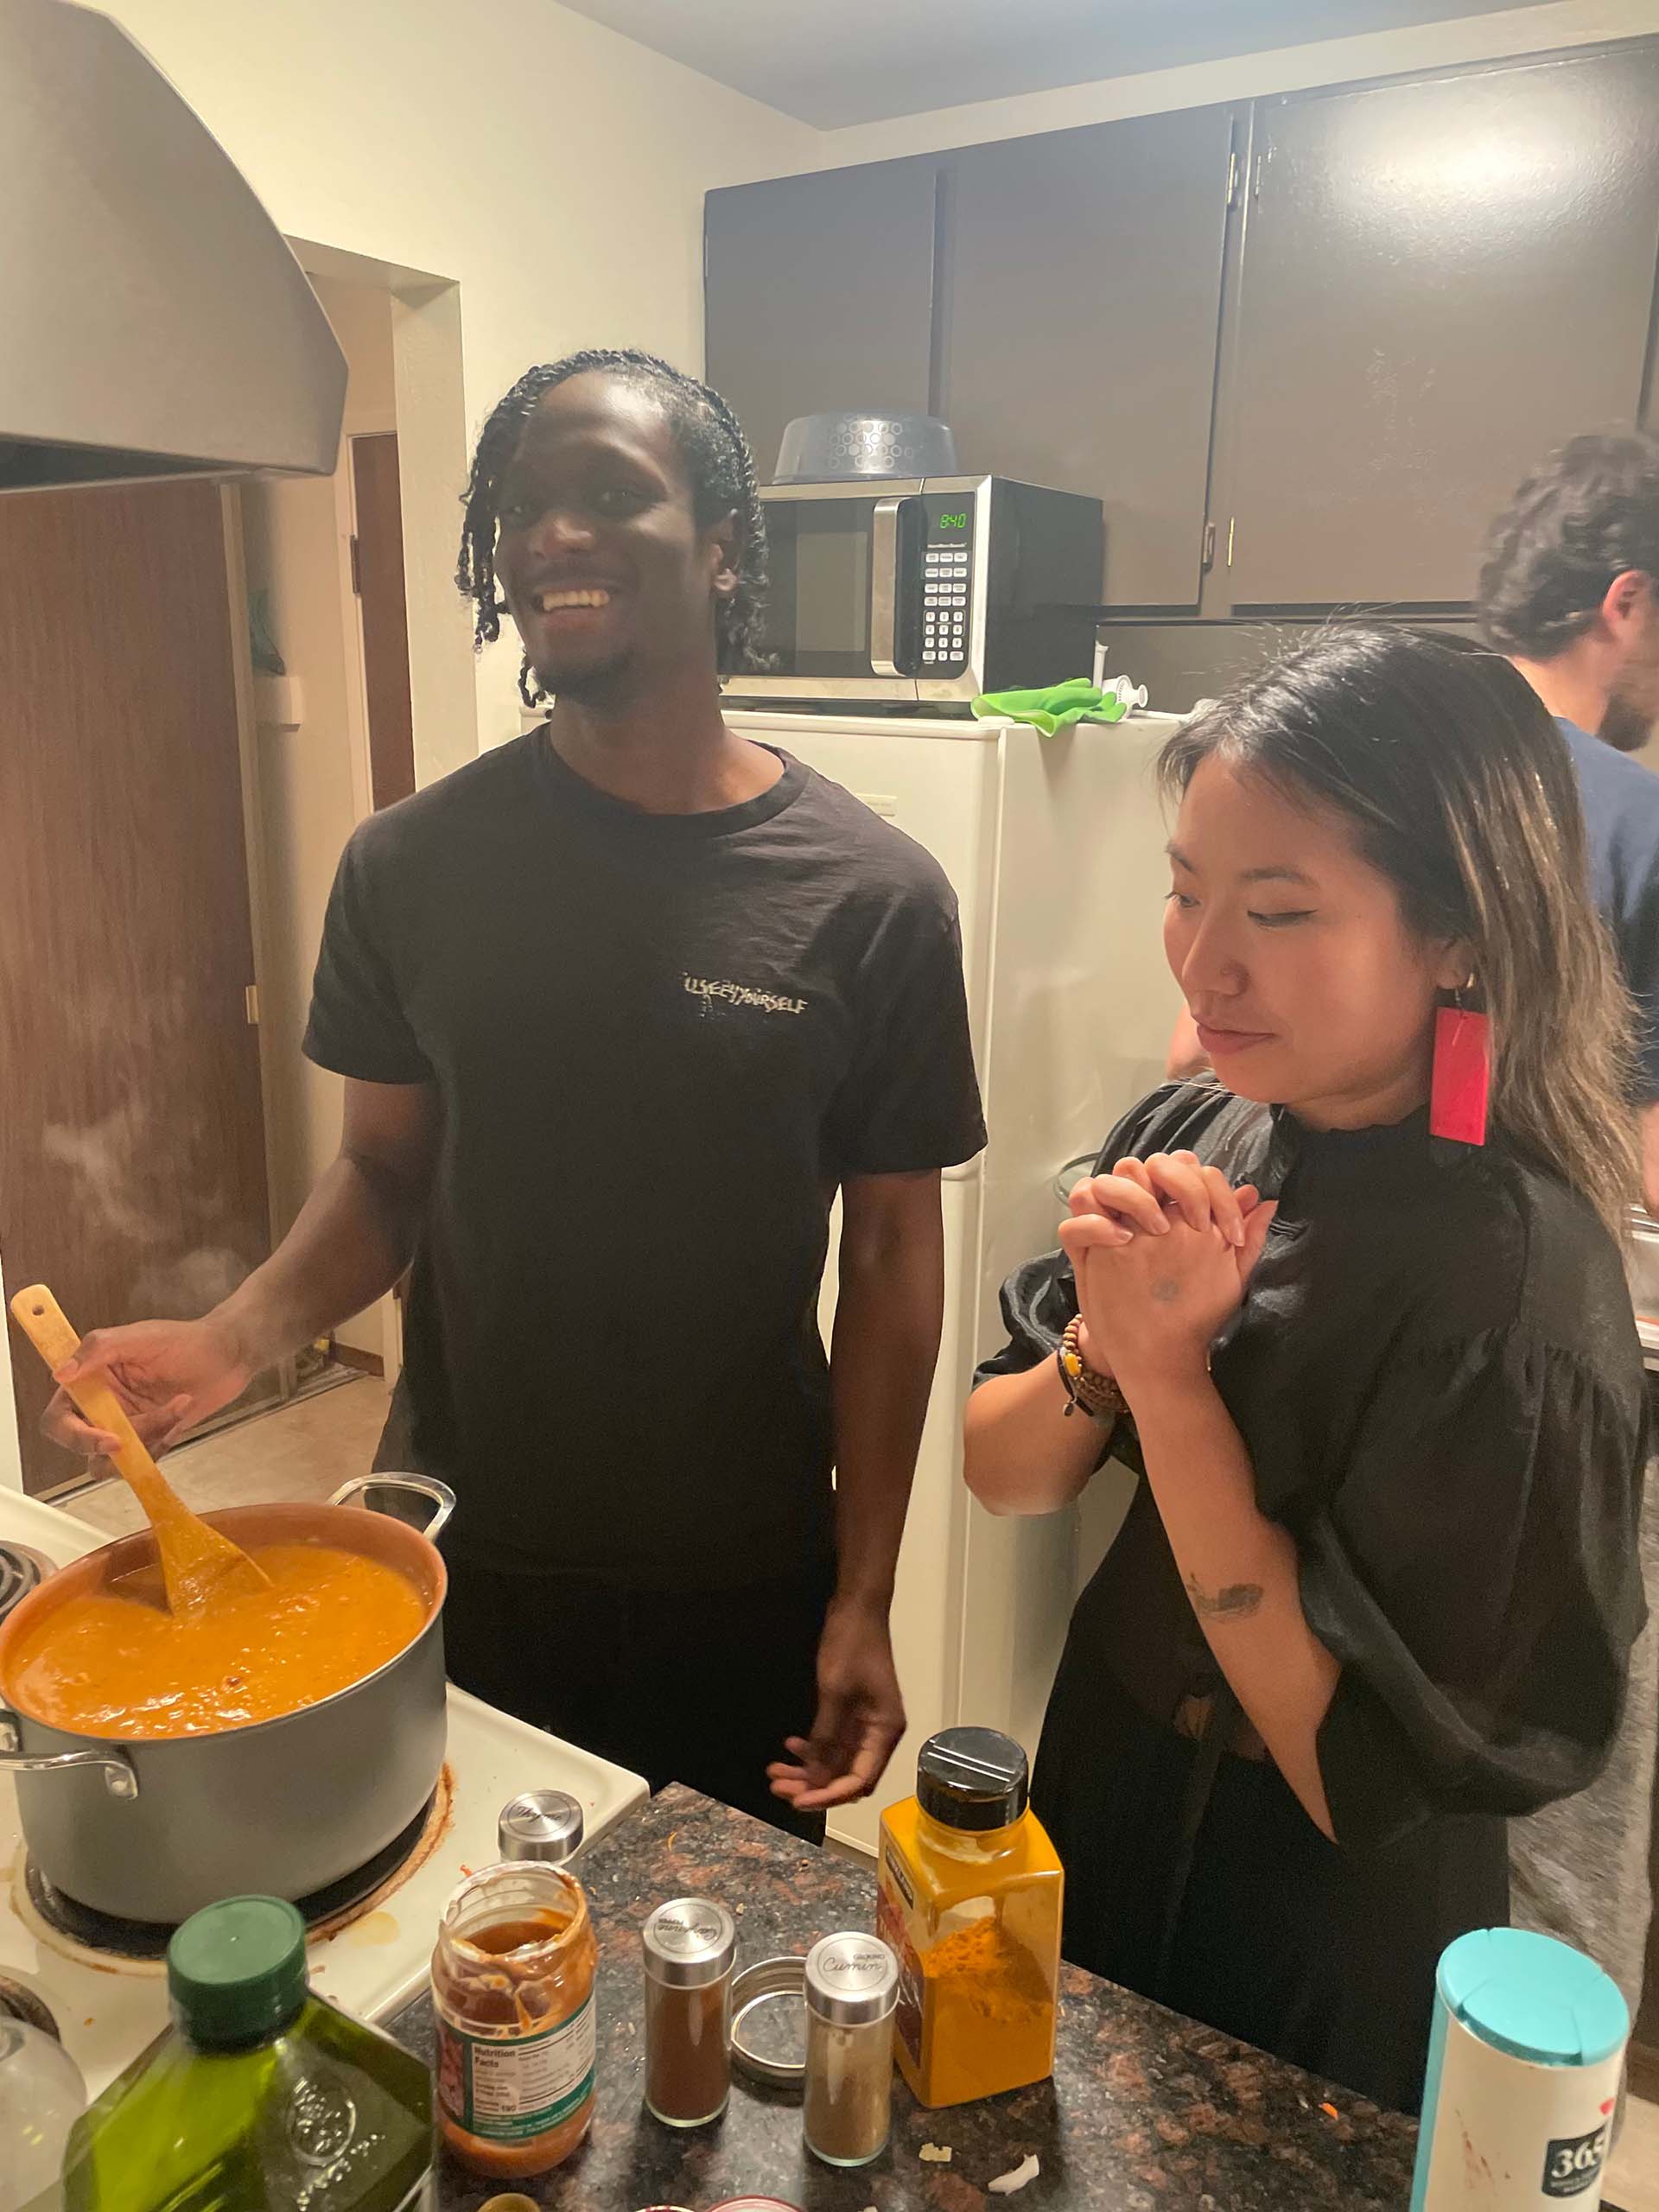 A man stirs a pot of peanut stew while a young woman looks on, pressing her hands together in anticipation.